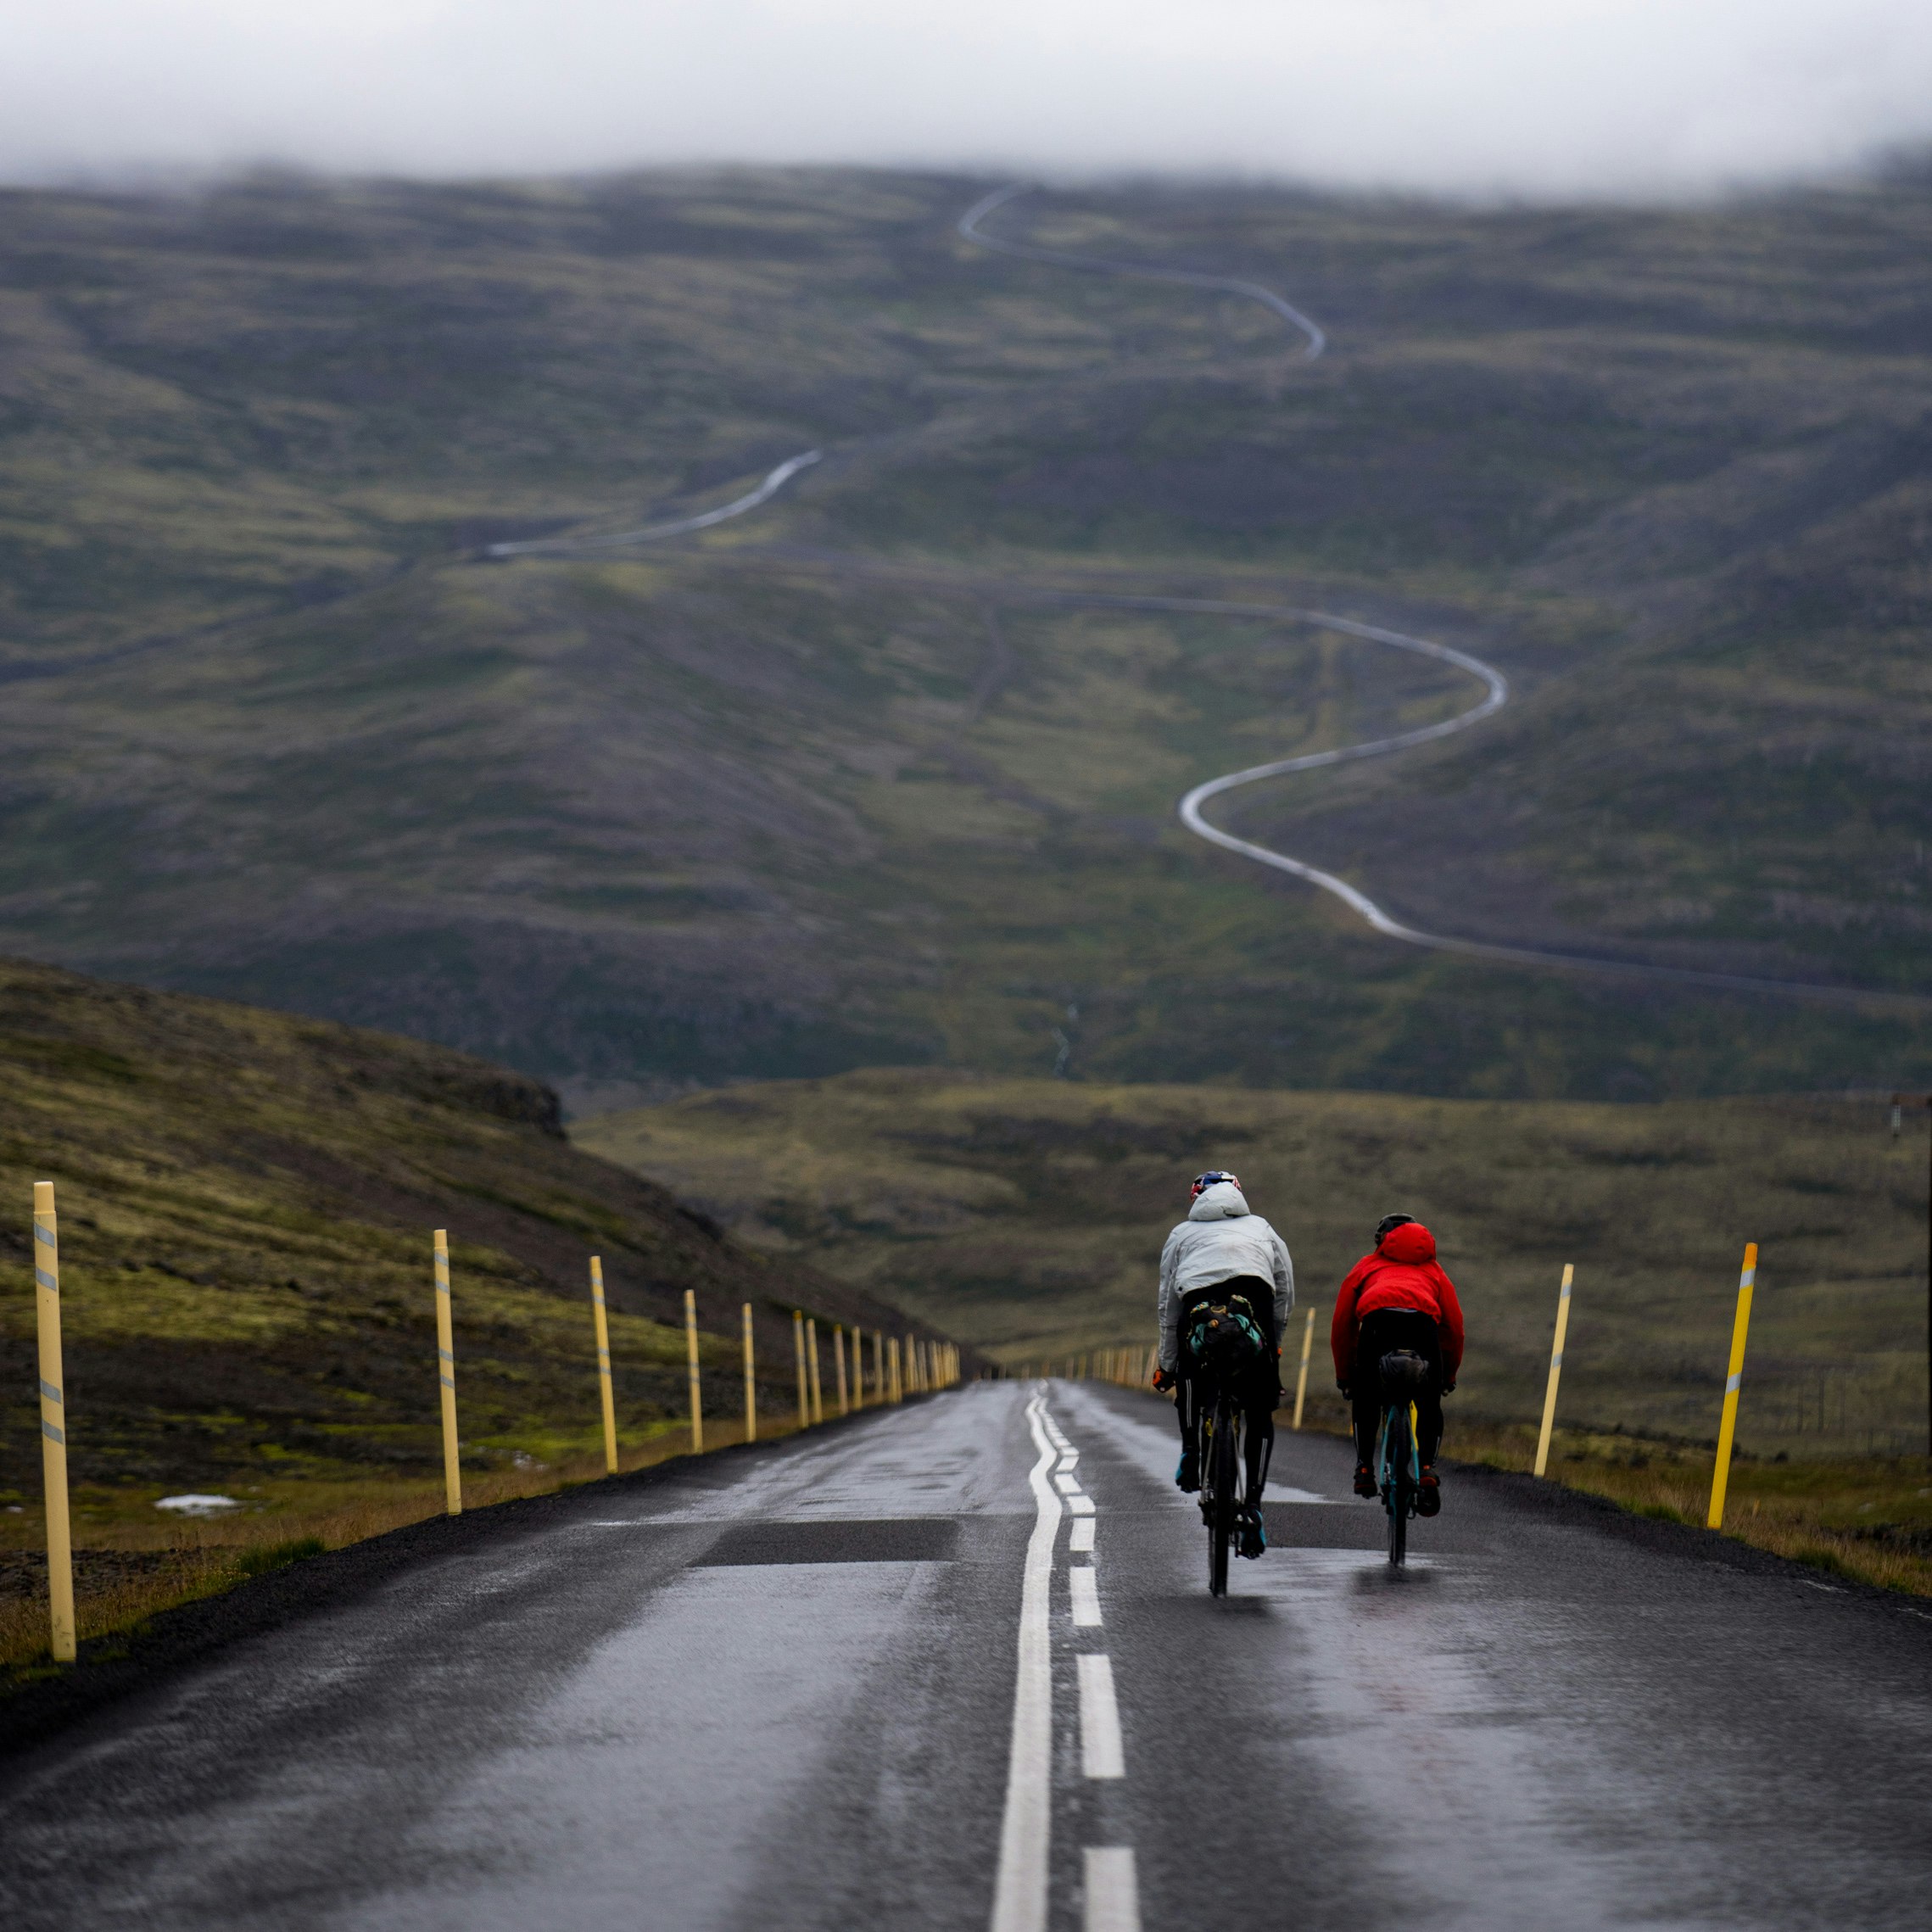 The group on bicycles crests a large hill with a sweeping view of winding roads ahead of them.